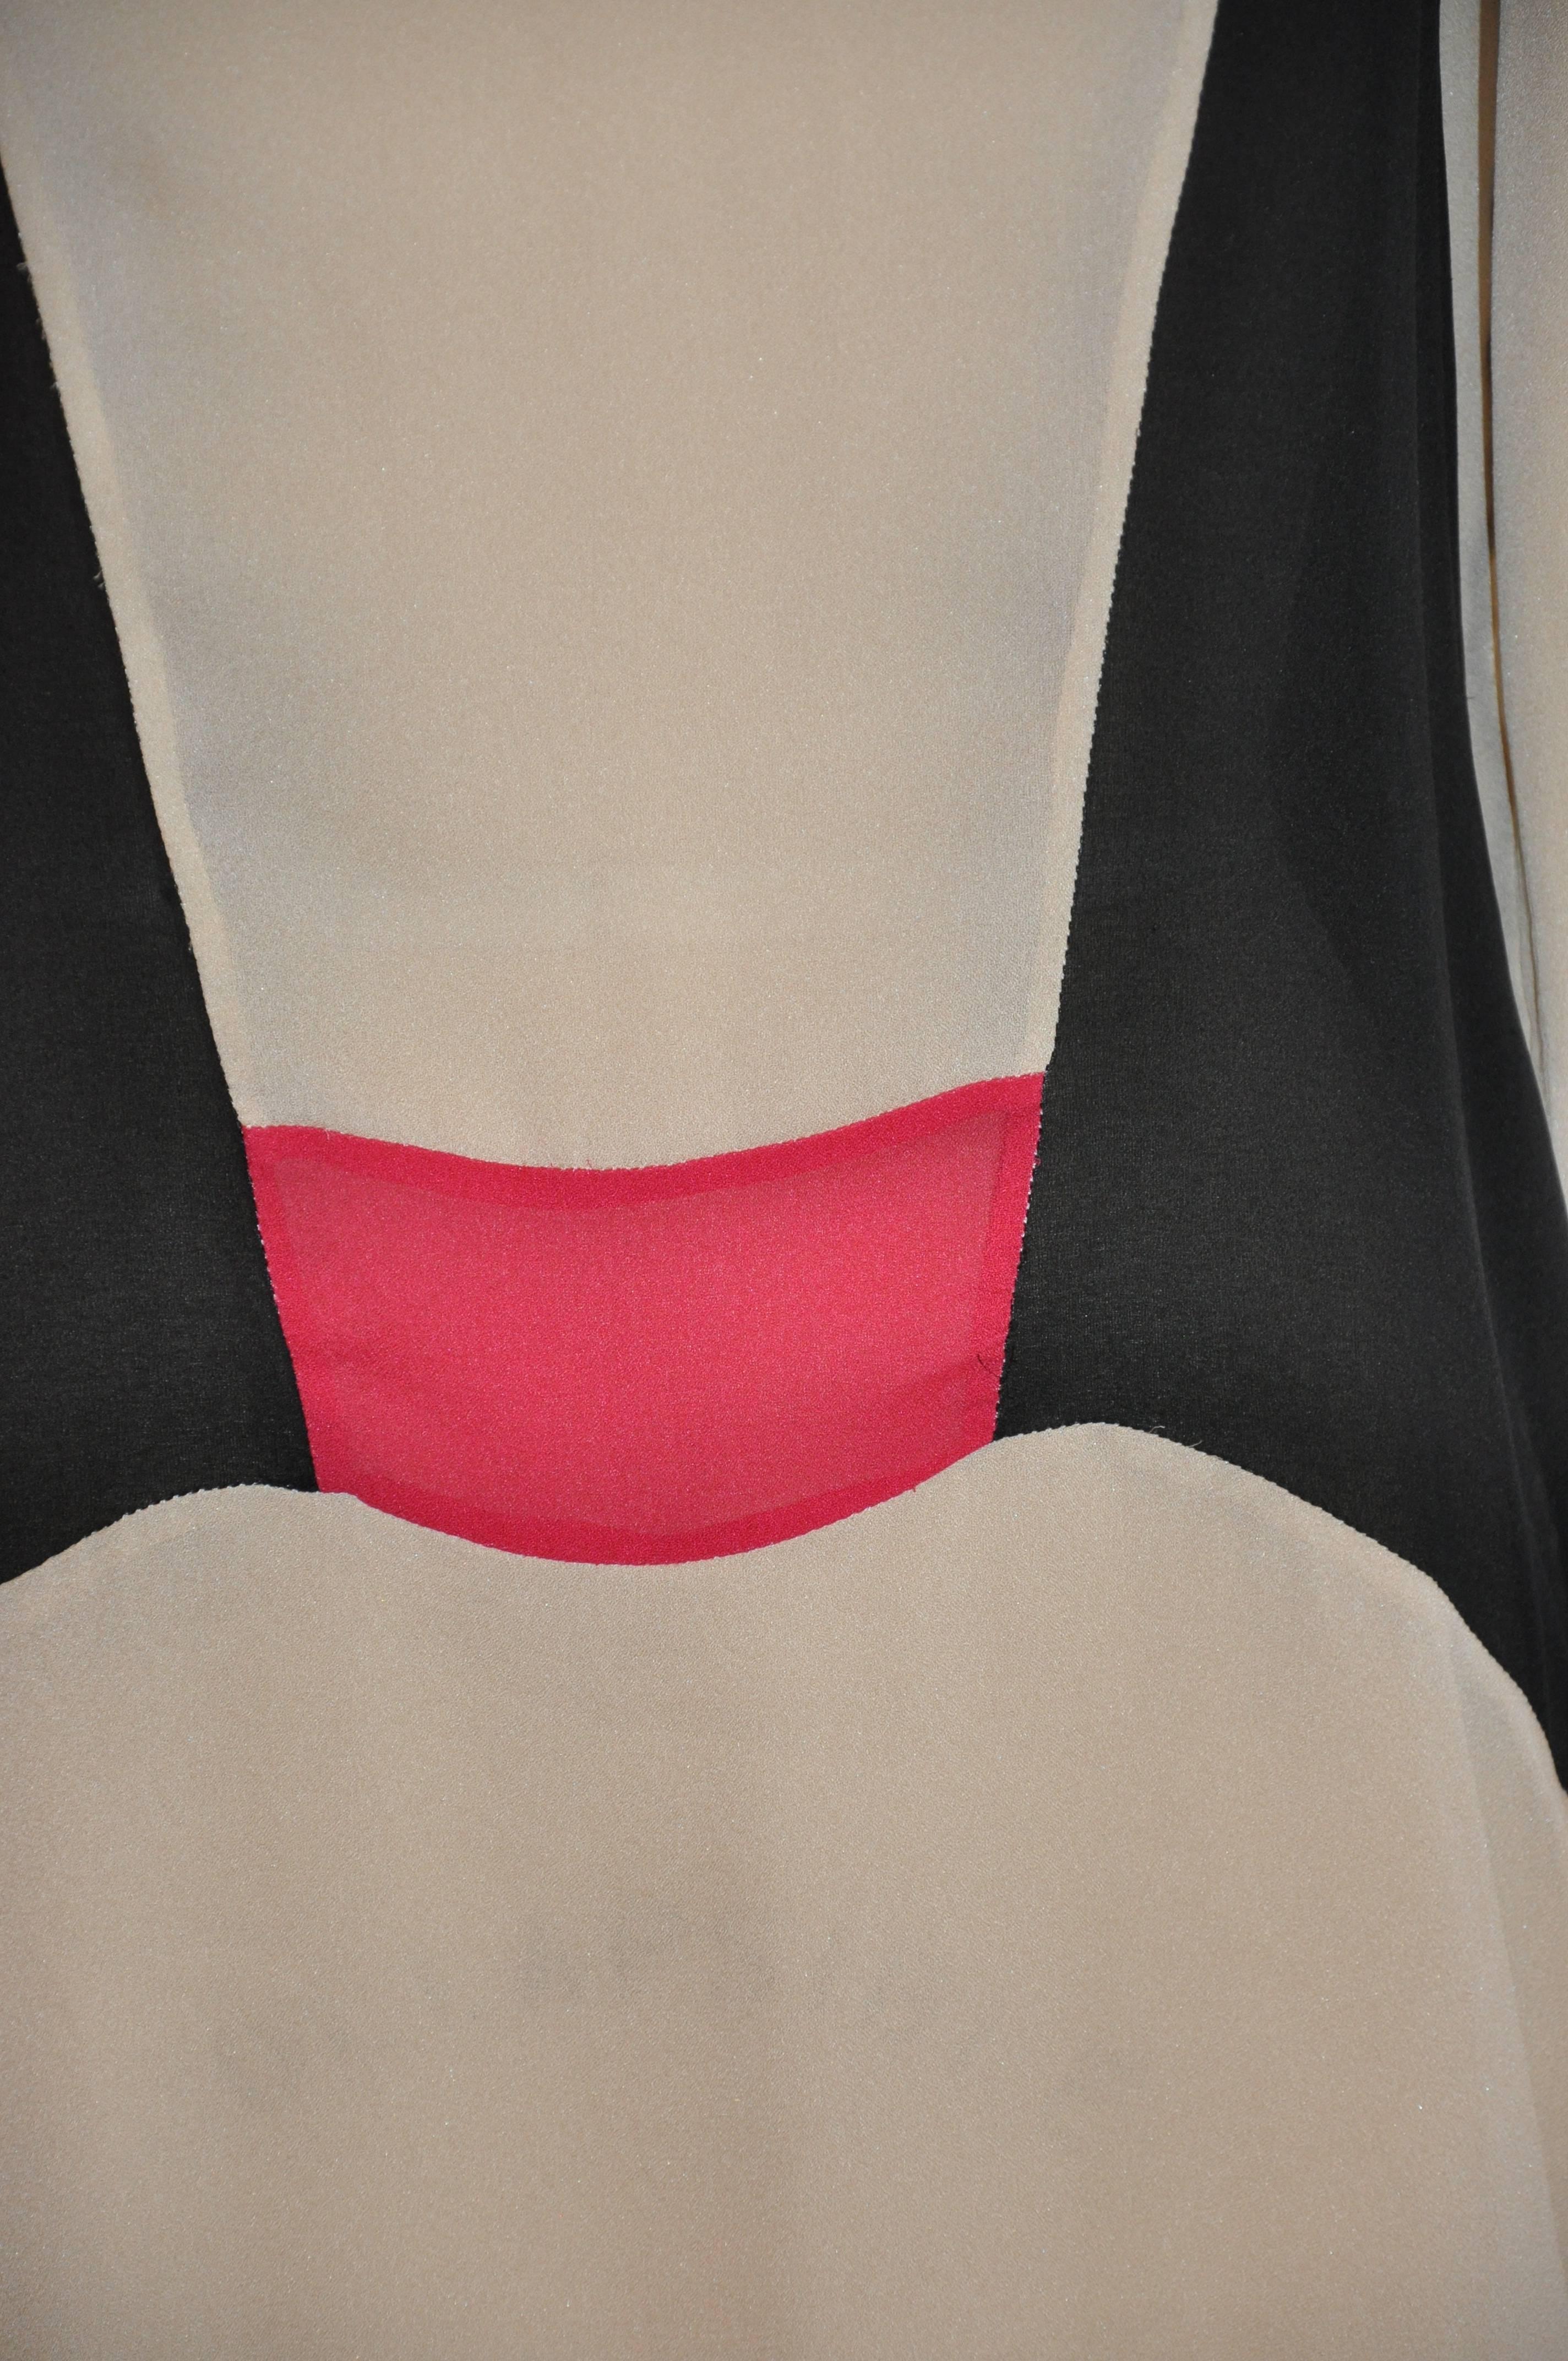       This wonderful ivory tunic is accented with black and highlighted with fuchsia. The interior is detailed with 